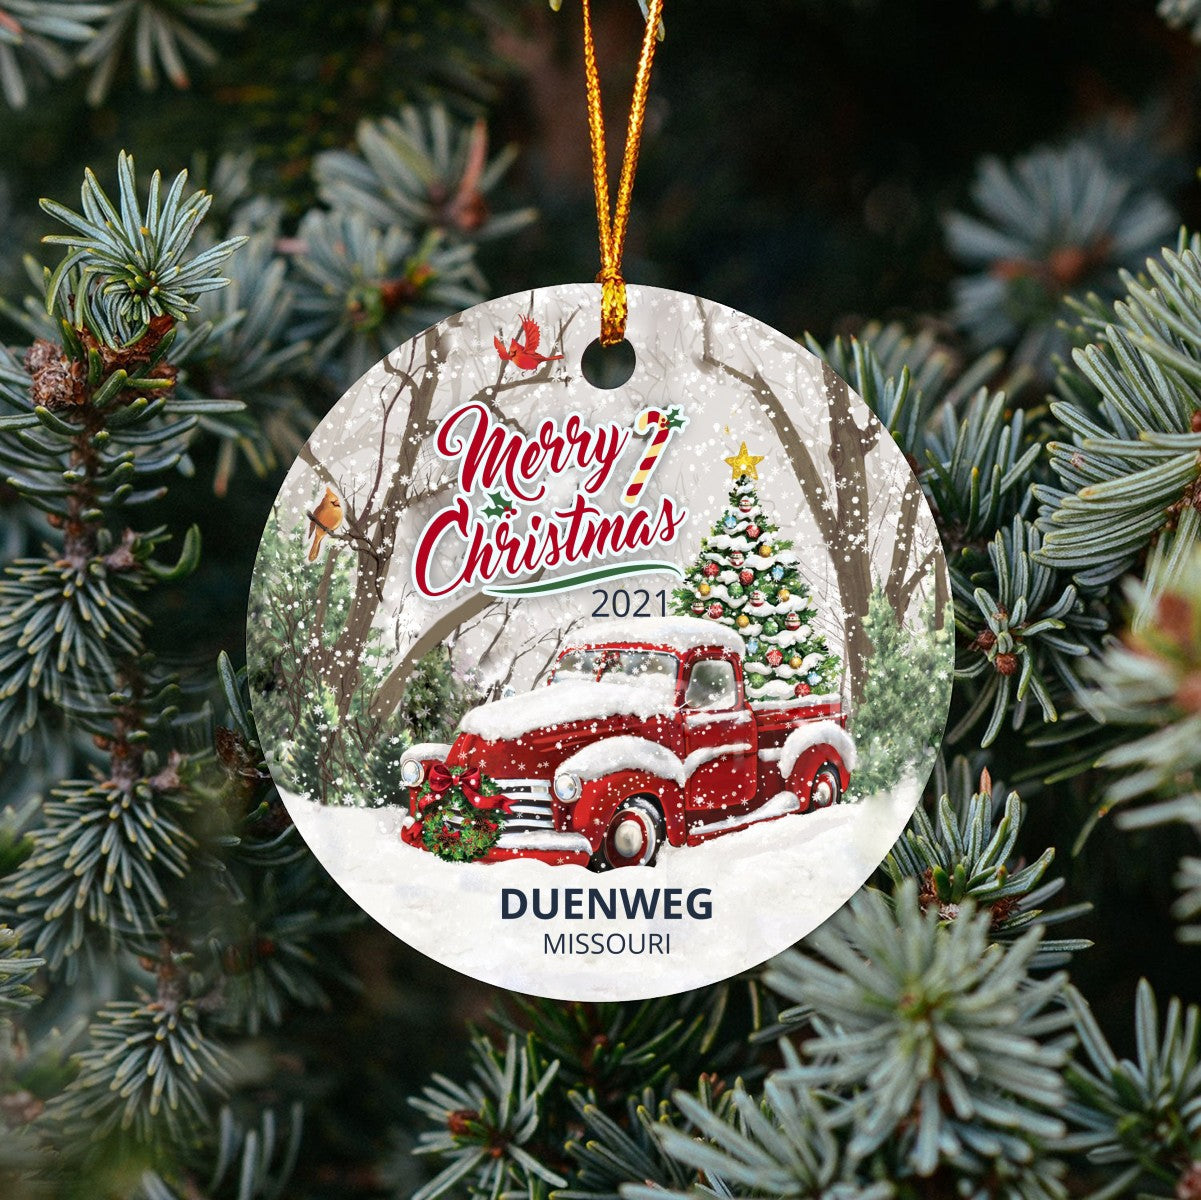 Christmas Tree Ornaments Duenweg - Ornament With Name City, State Duenweg Missouri MO Ornament - Red Truck Xmas Ornaments 3'' Plastic Gift For Family, Friend And Housewarming